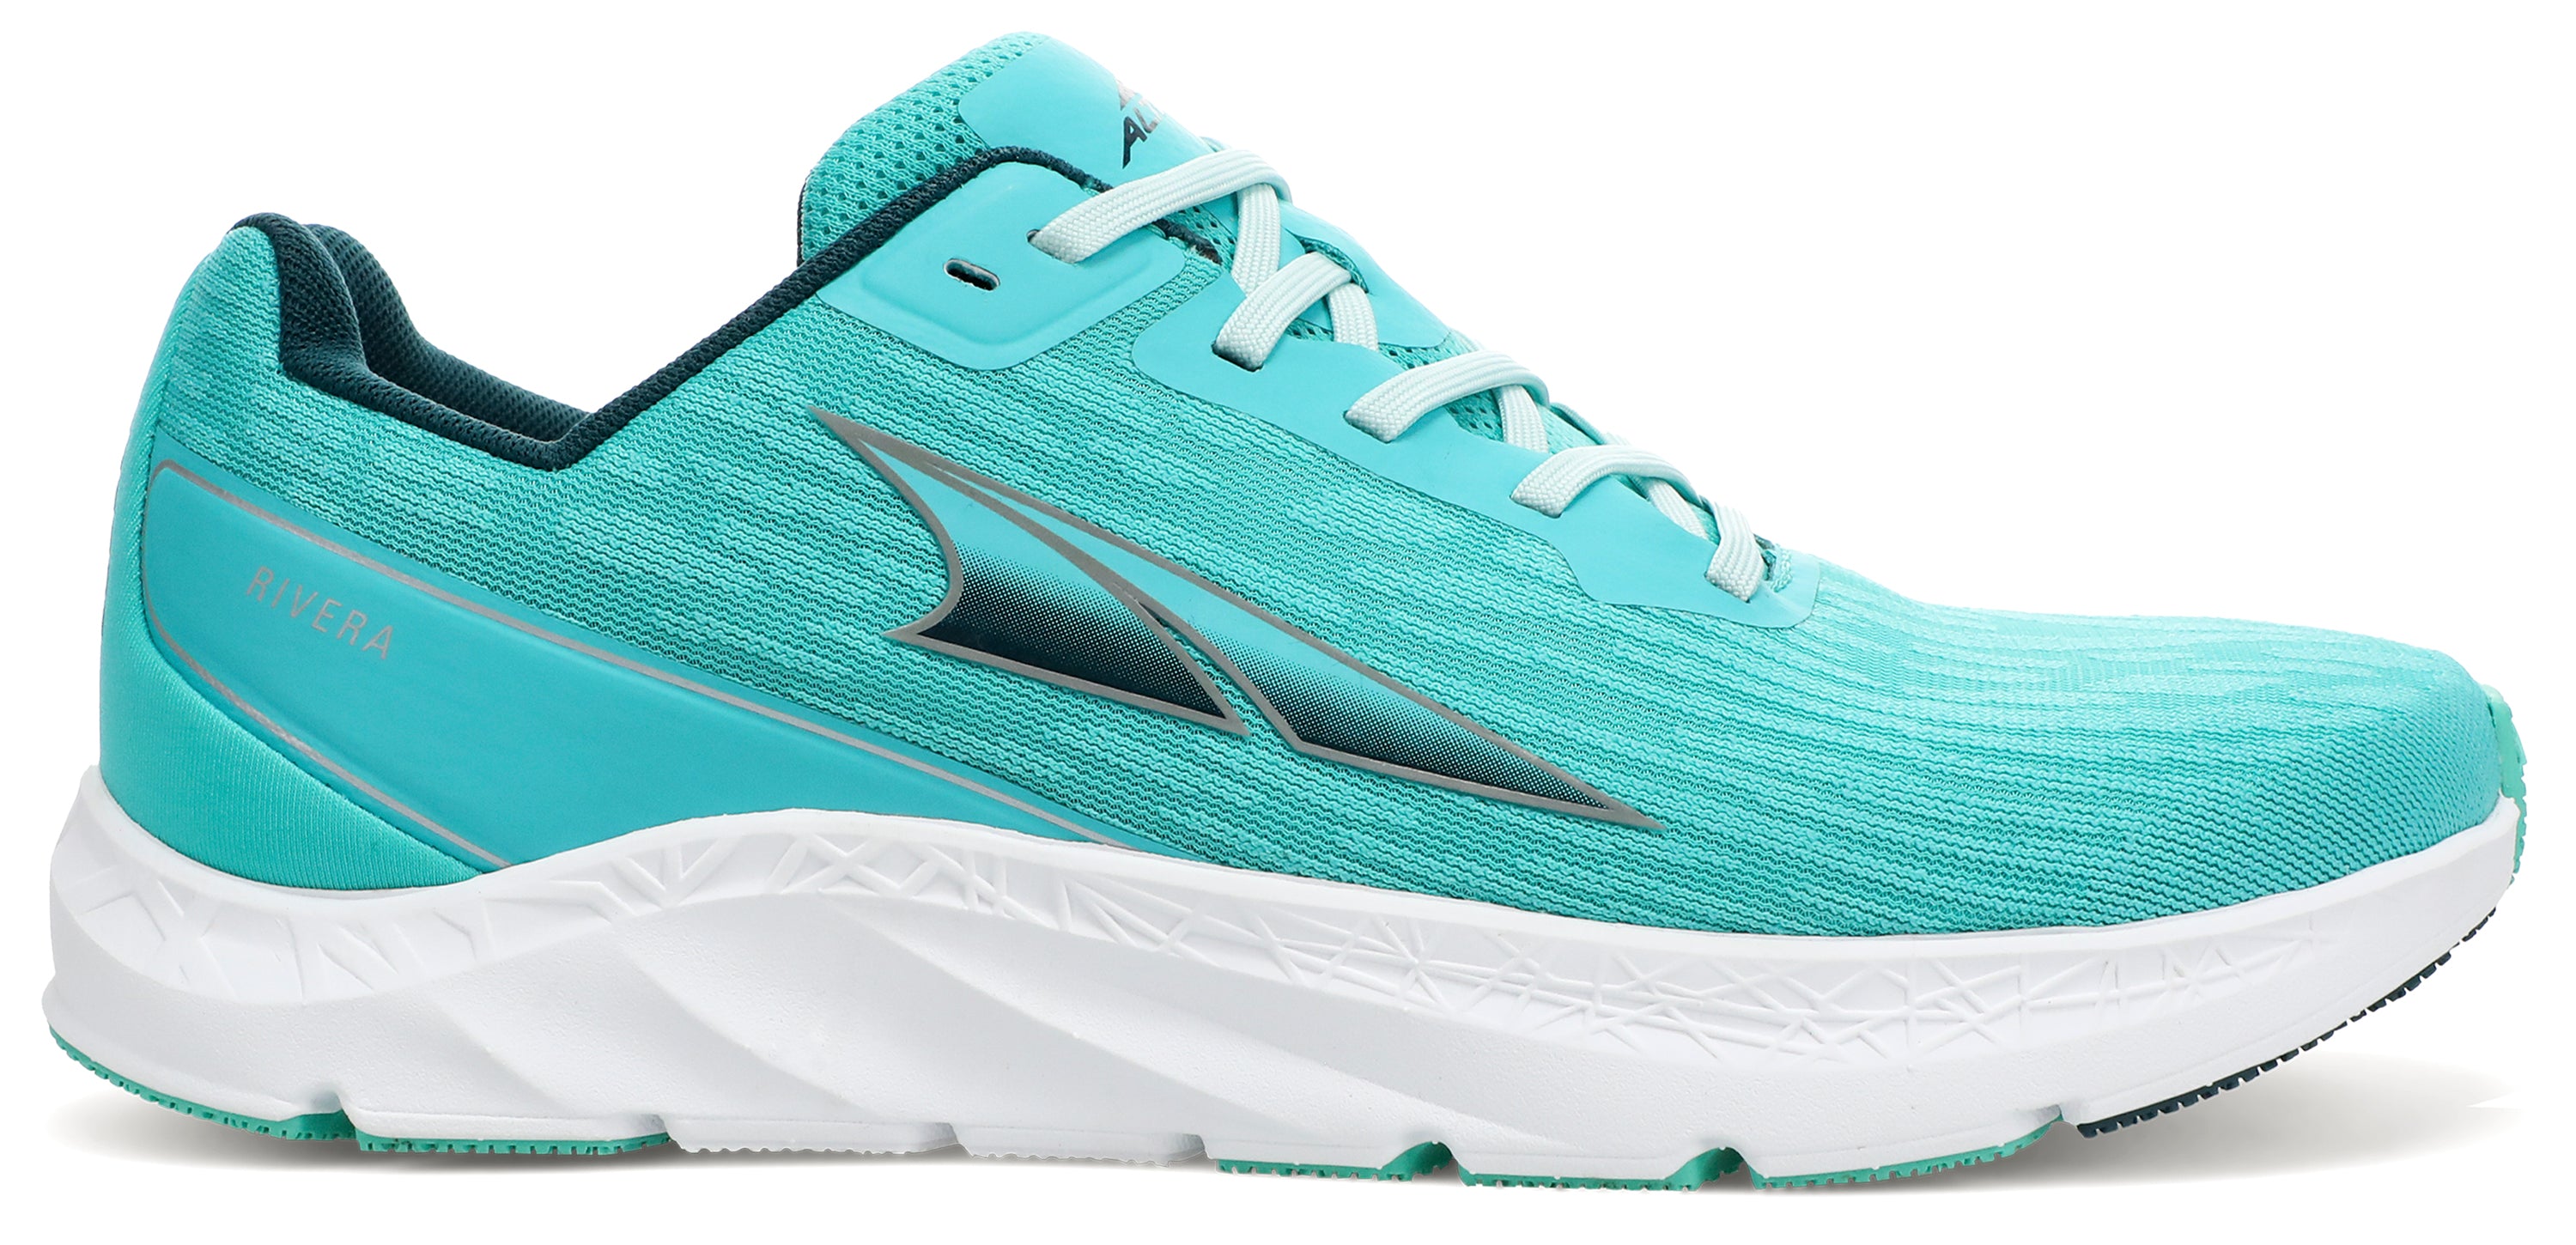 Altra Women's Rivera Road Running Shoe in Teal/Green from the side